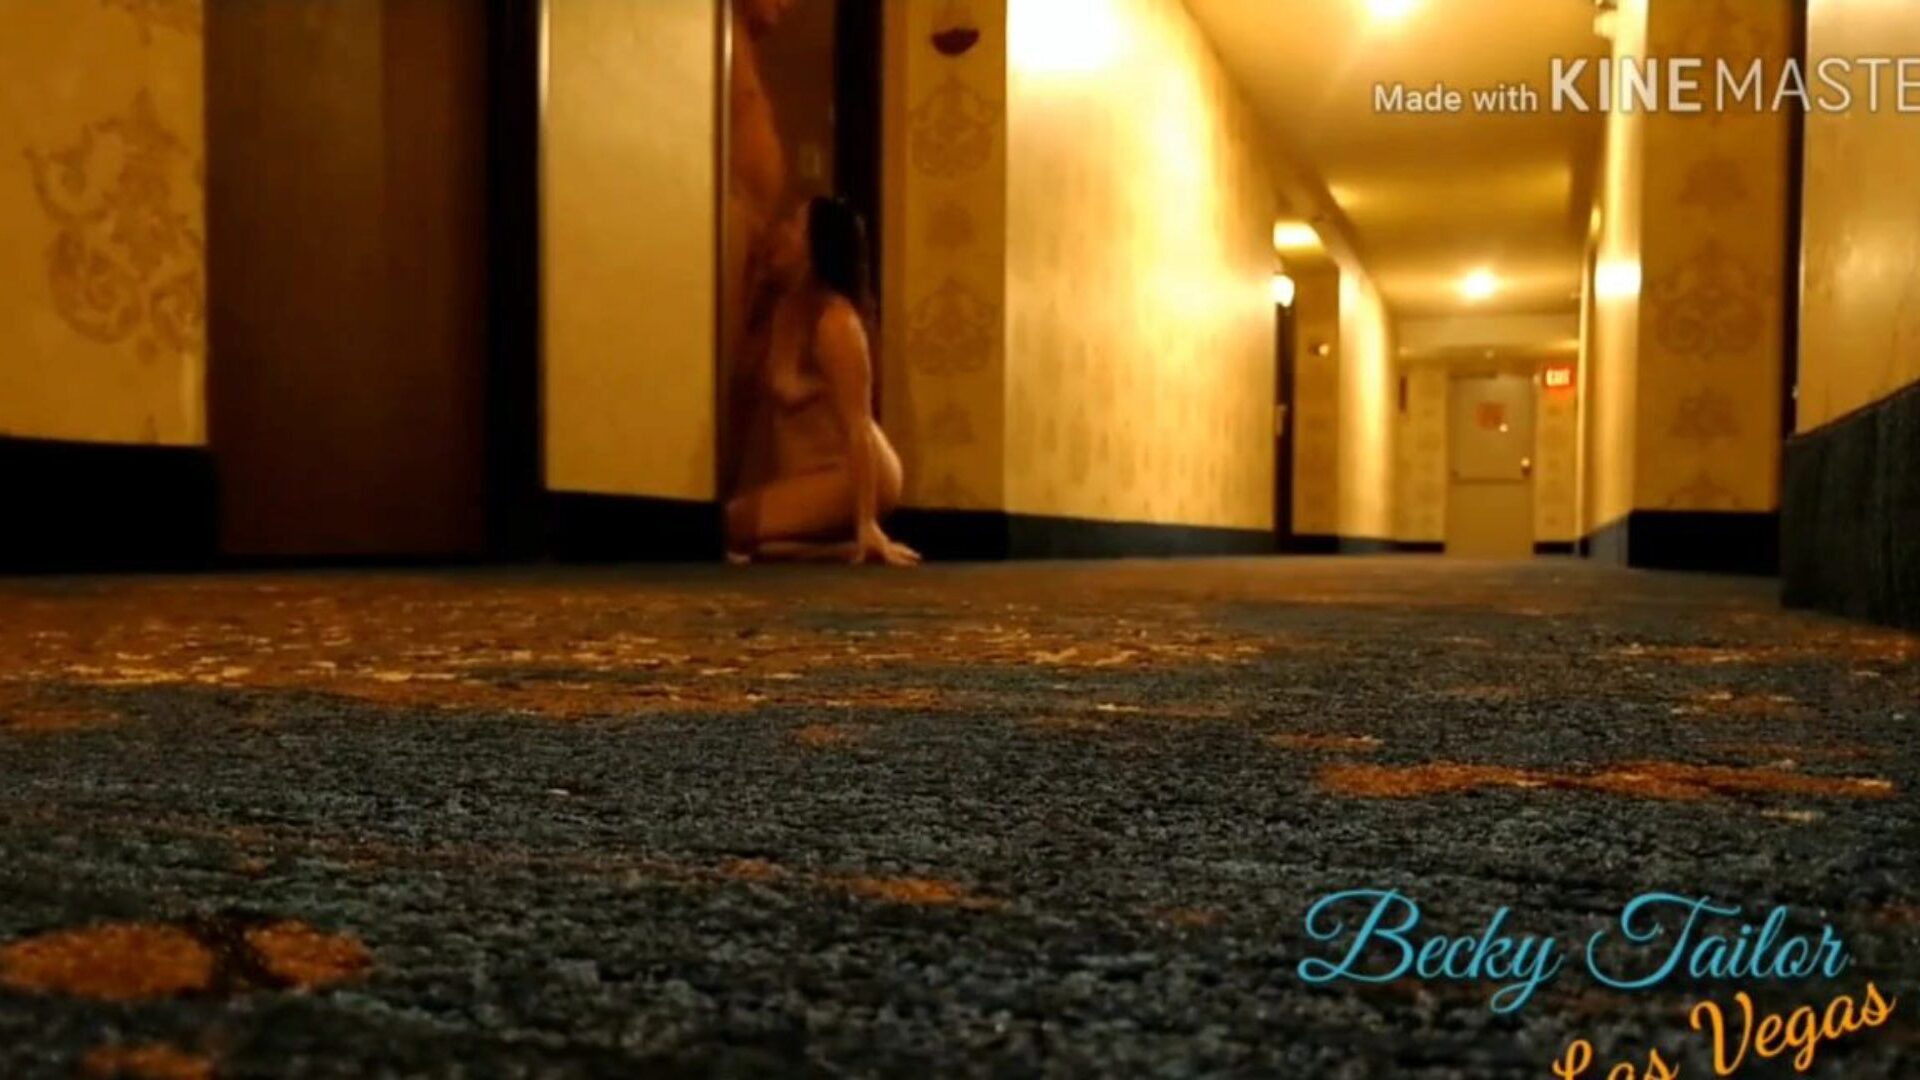 Fucking Wife in Vegas Hotel Hallway, Free Porn 0b: xHamster Watch Fucking Wife in Vegas Hotel Hallway clip on xHamster, the most excellent HD sex tube web page with tons of free-for-all mother I'd like to fuck Voyeur & Hidden Camera porno movies